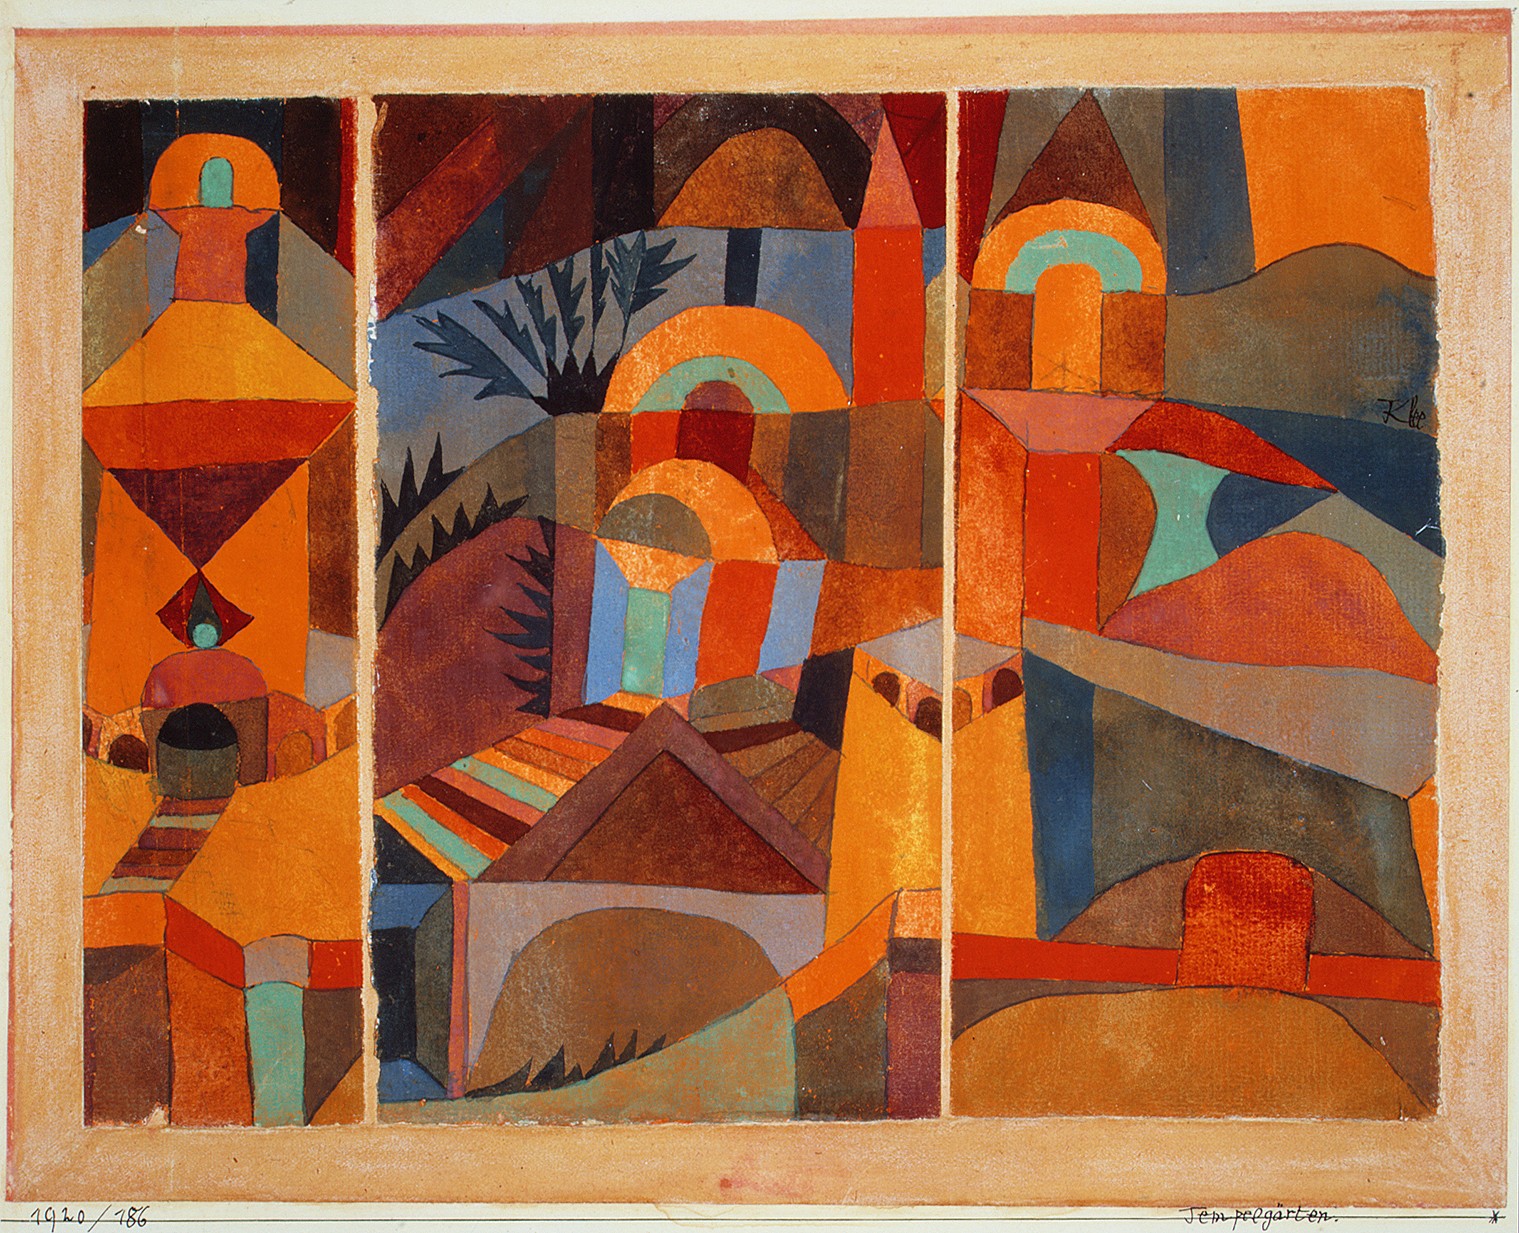 Paul Klee, Temple Gardens, 1920. Klee taught classes in elemental design theory as
part of the Bauhaus preliminary course